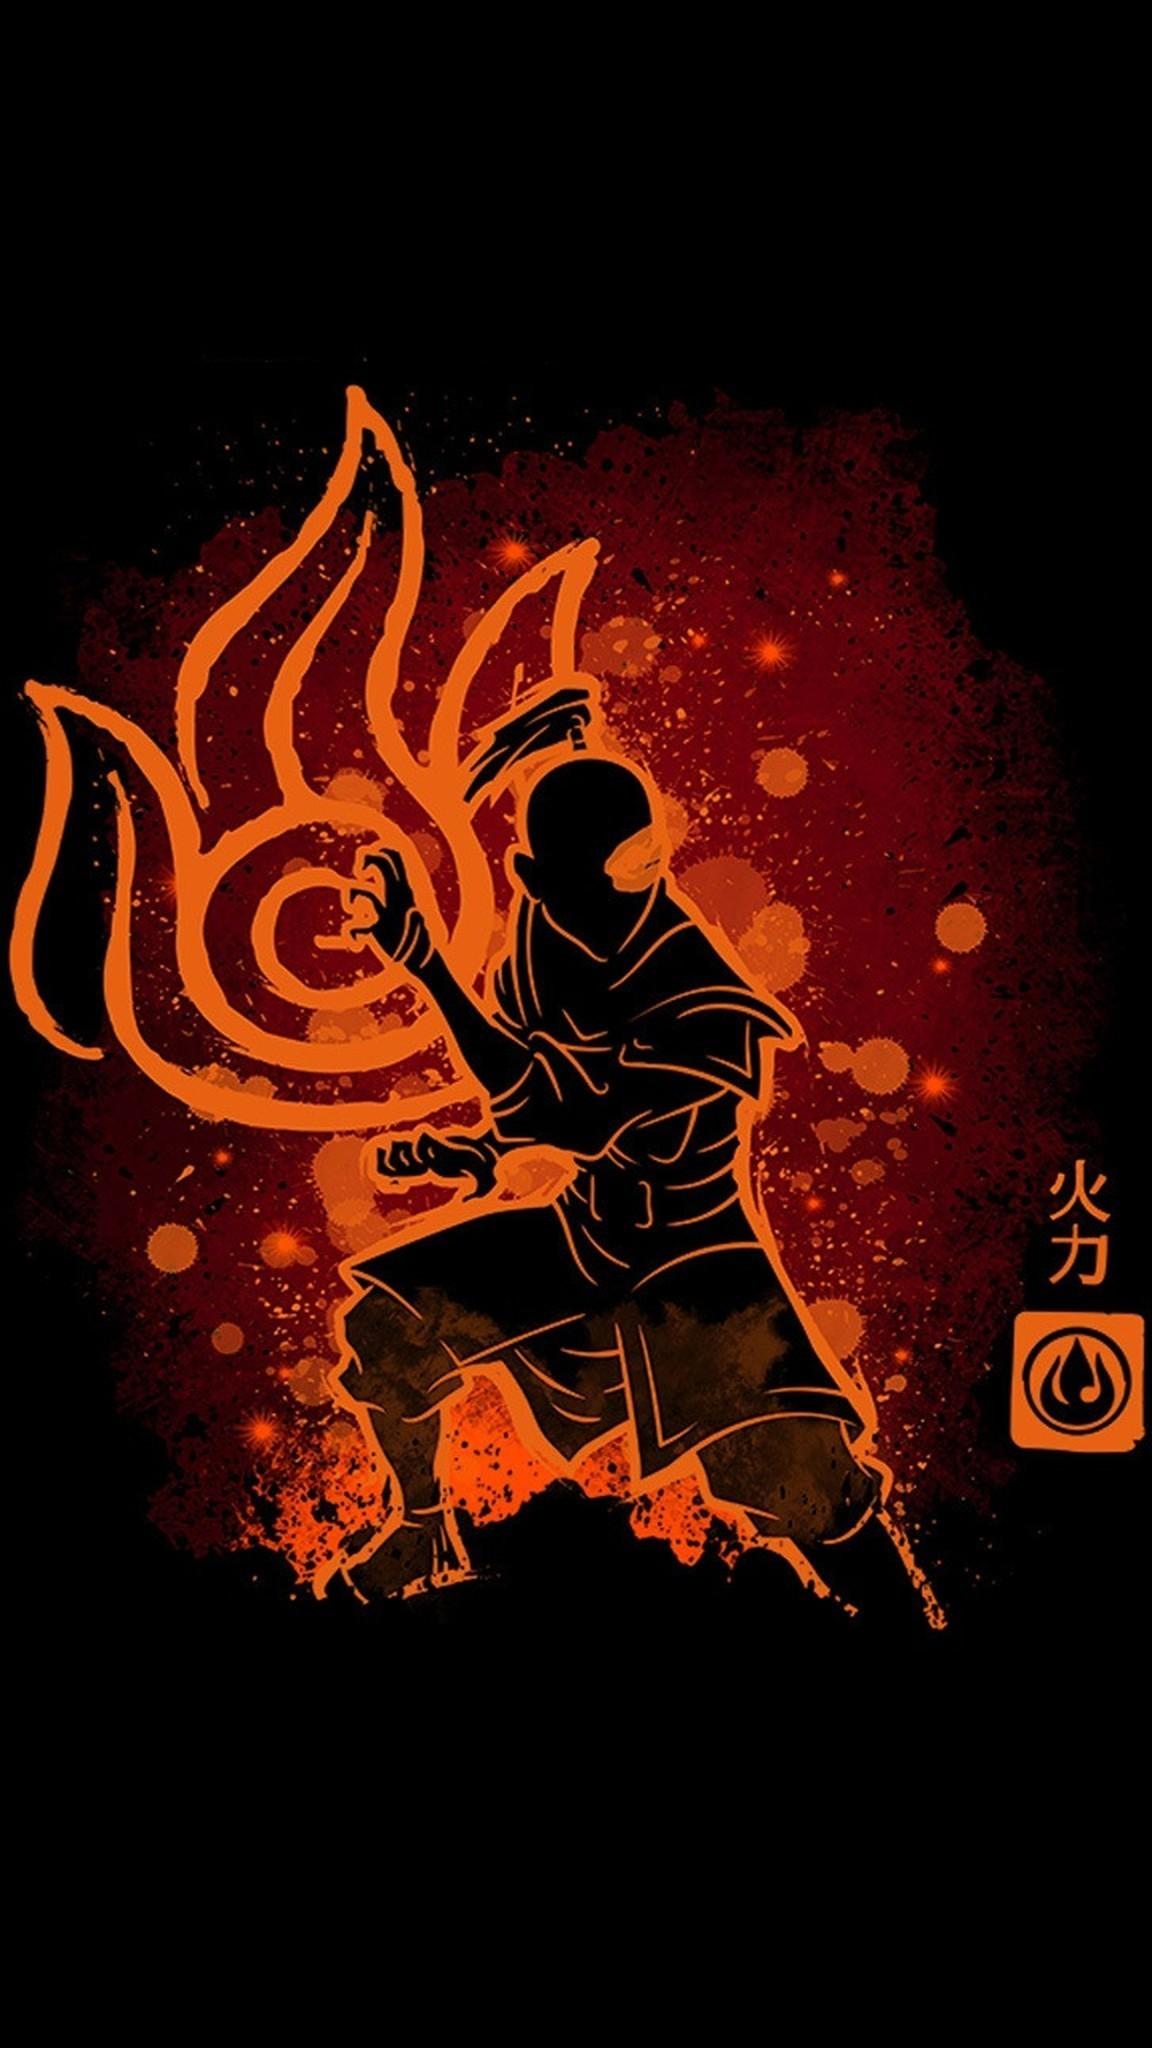 Avatar The Last Airbender Phone Wallpapers